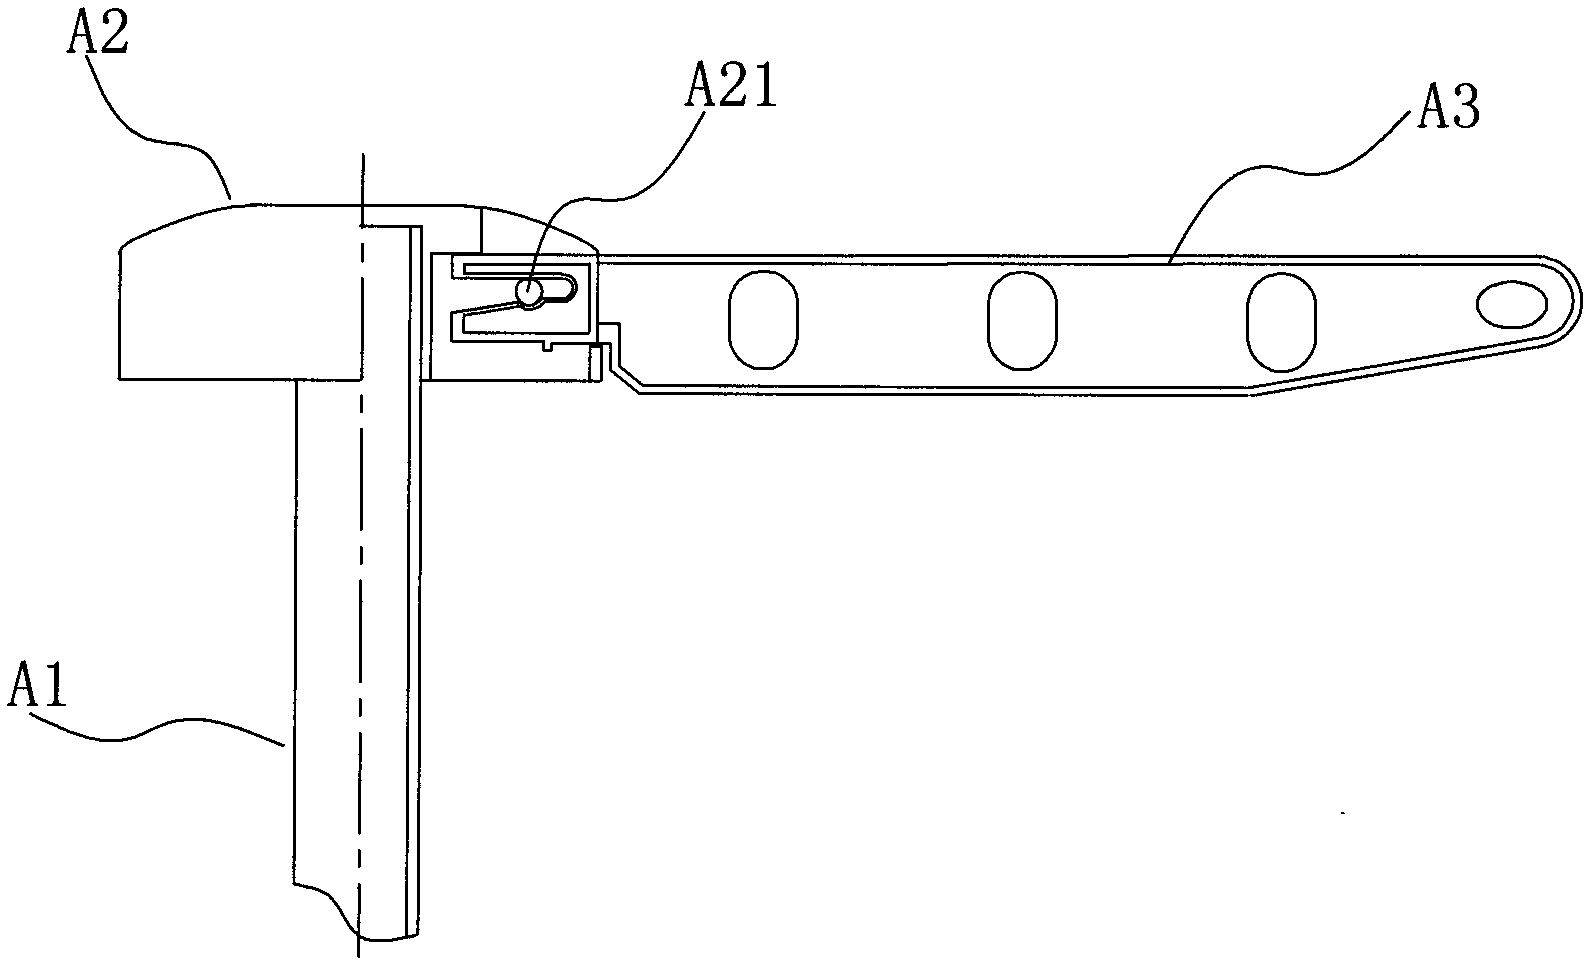 Detachable support structure for clothes dryer